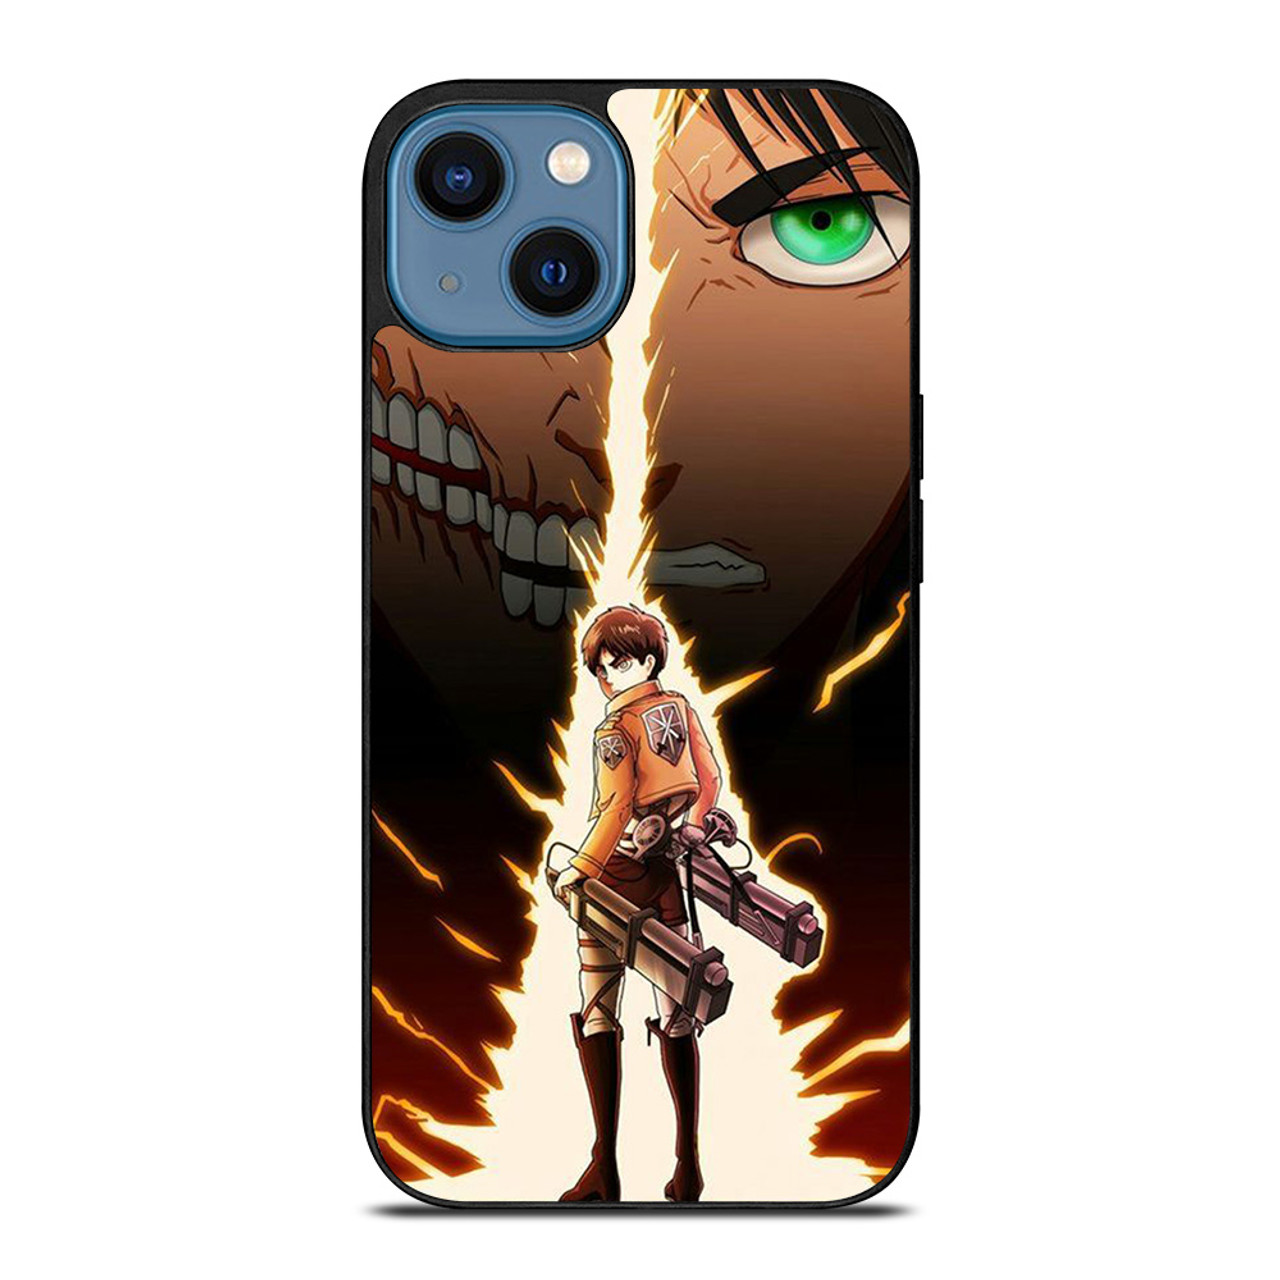 AHEGAO FACE ANIME 2 iPhone 14 Pro Max Case Cover